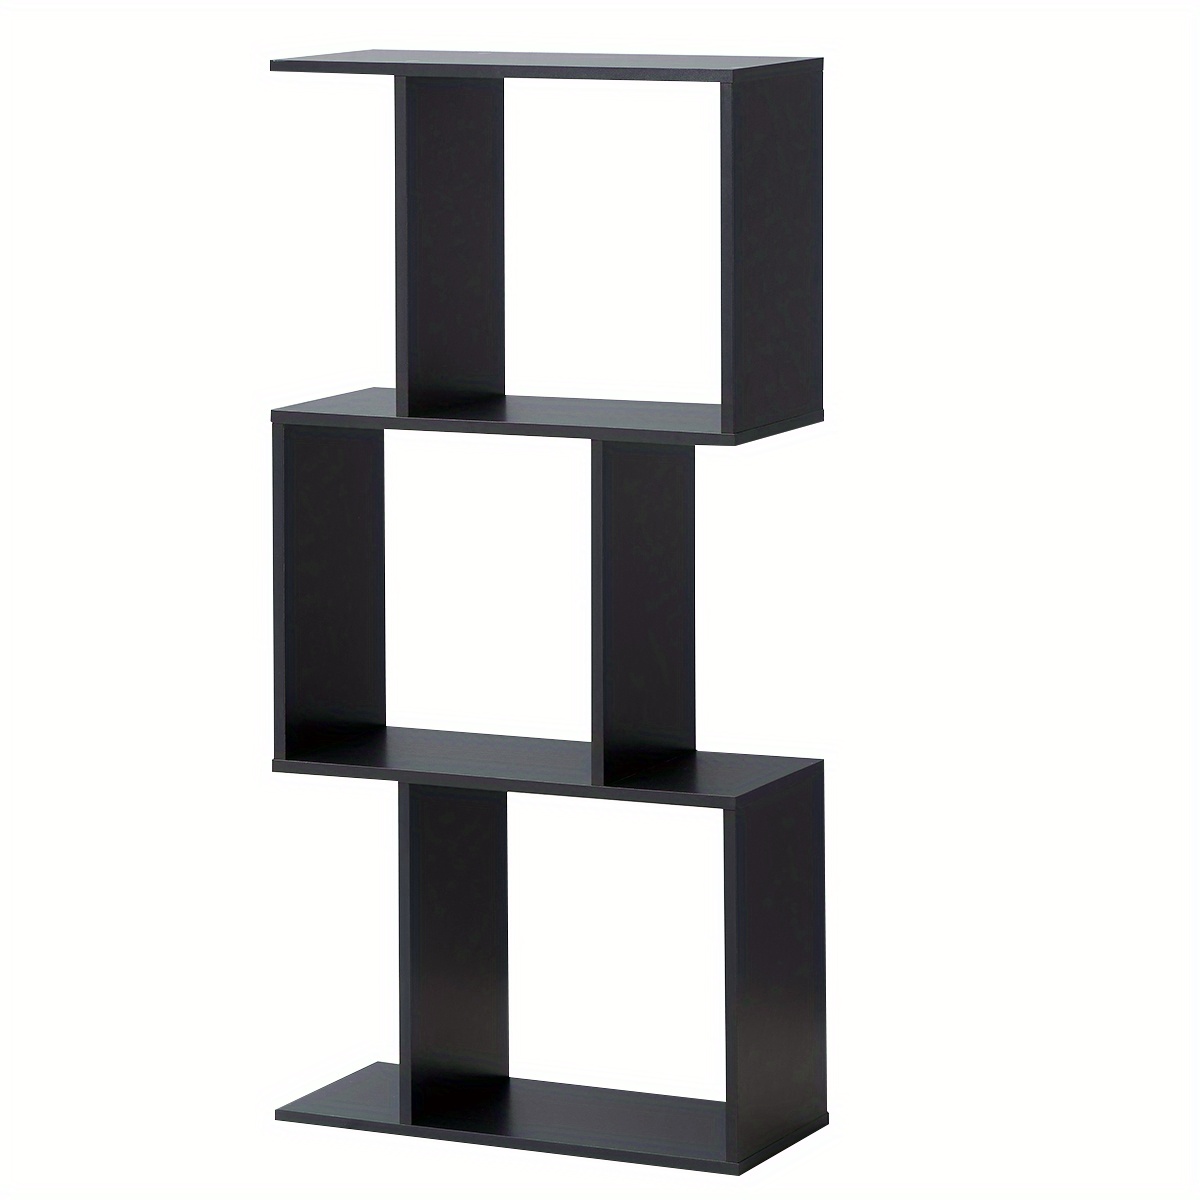 

Lifezeal 3-tier S-shaped Bookcase Free Standing Storage Rack Wooden Display Decor Black